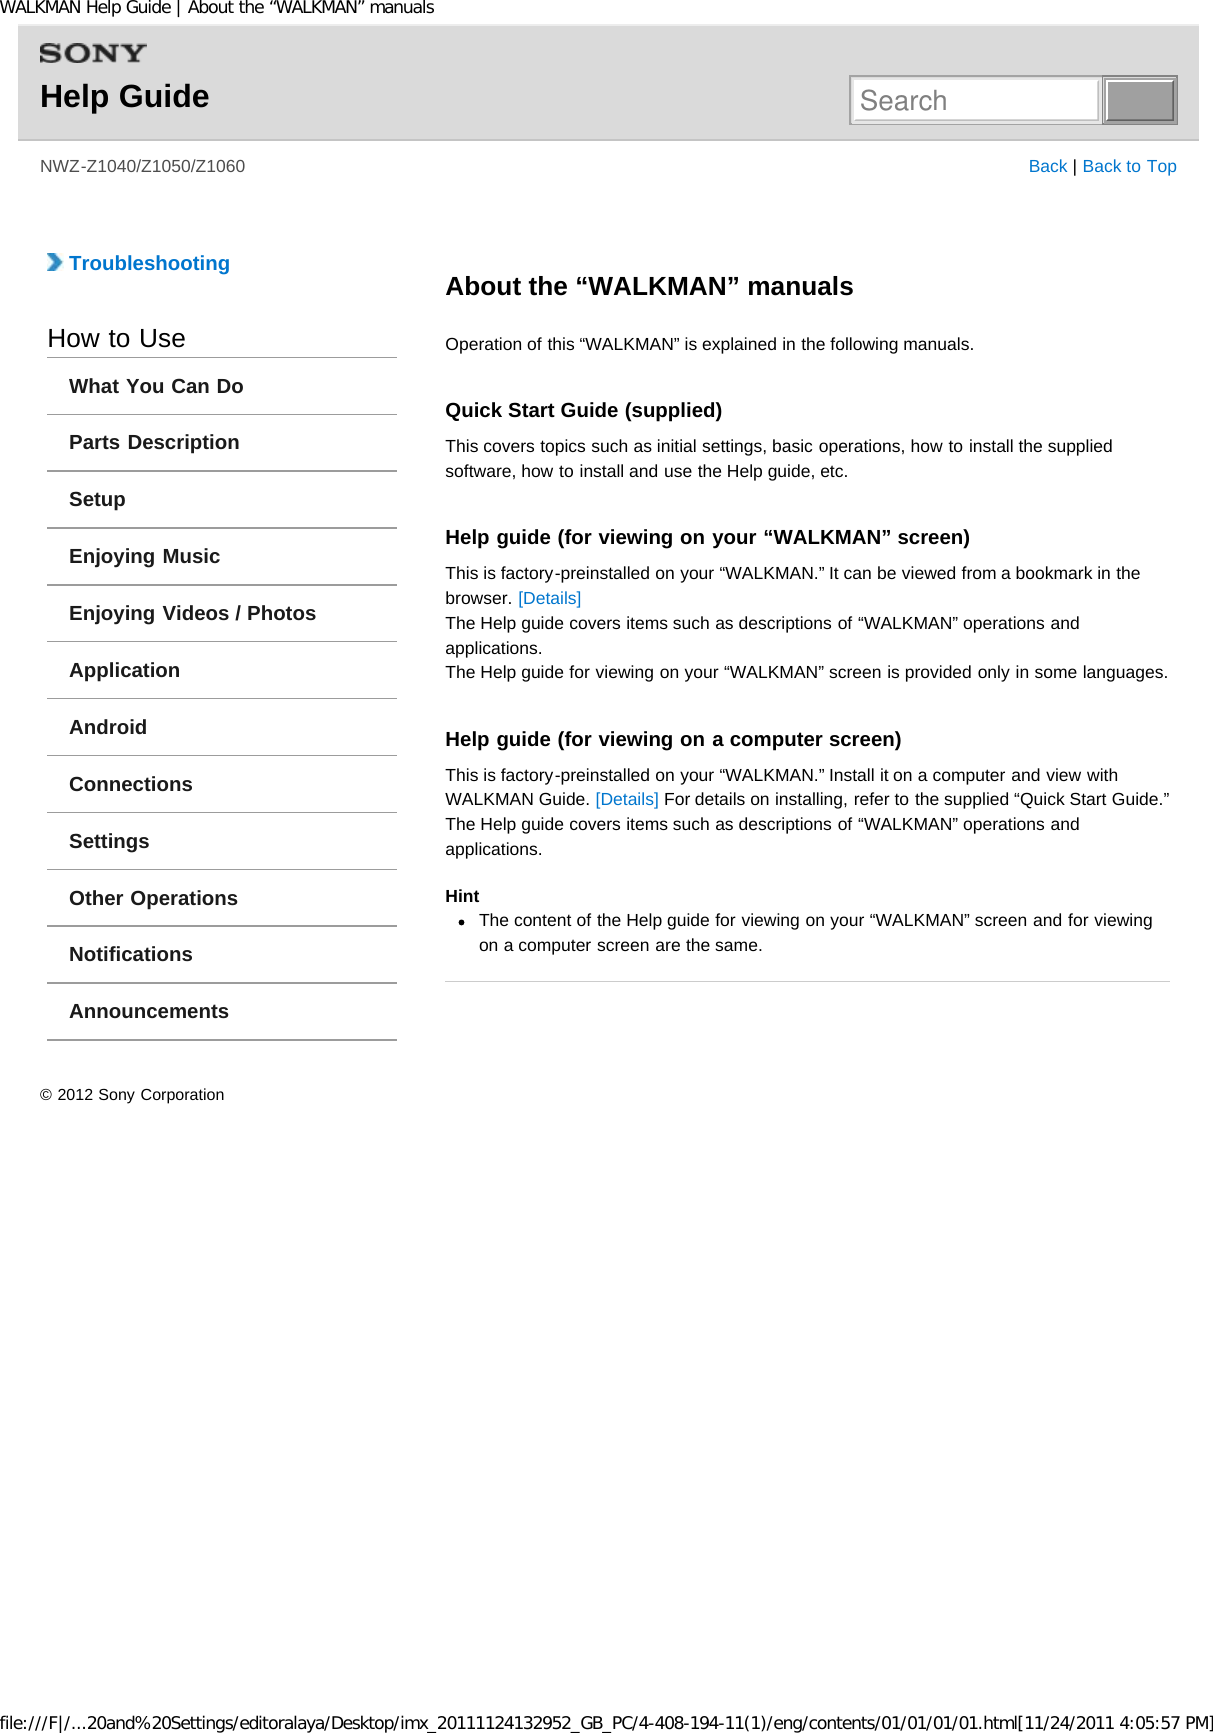 Page 15 of Sony Group NWZZ1000 Digital Media Player User Manual WALKMAN Help Guide   Top page